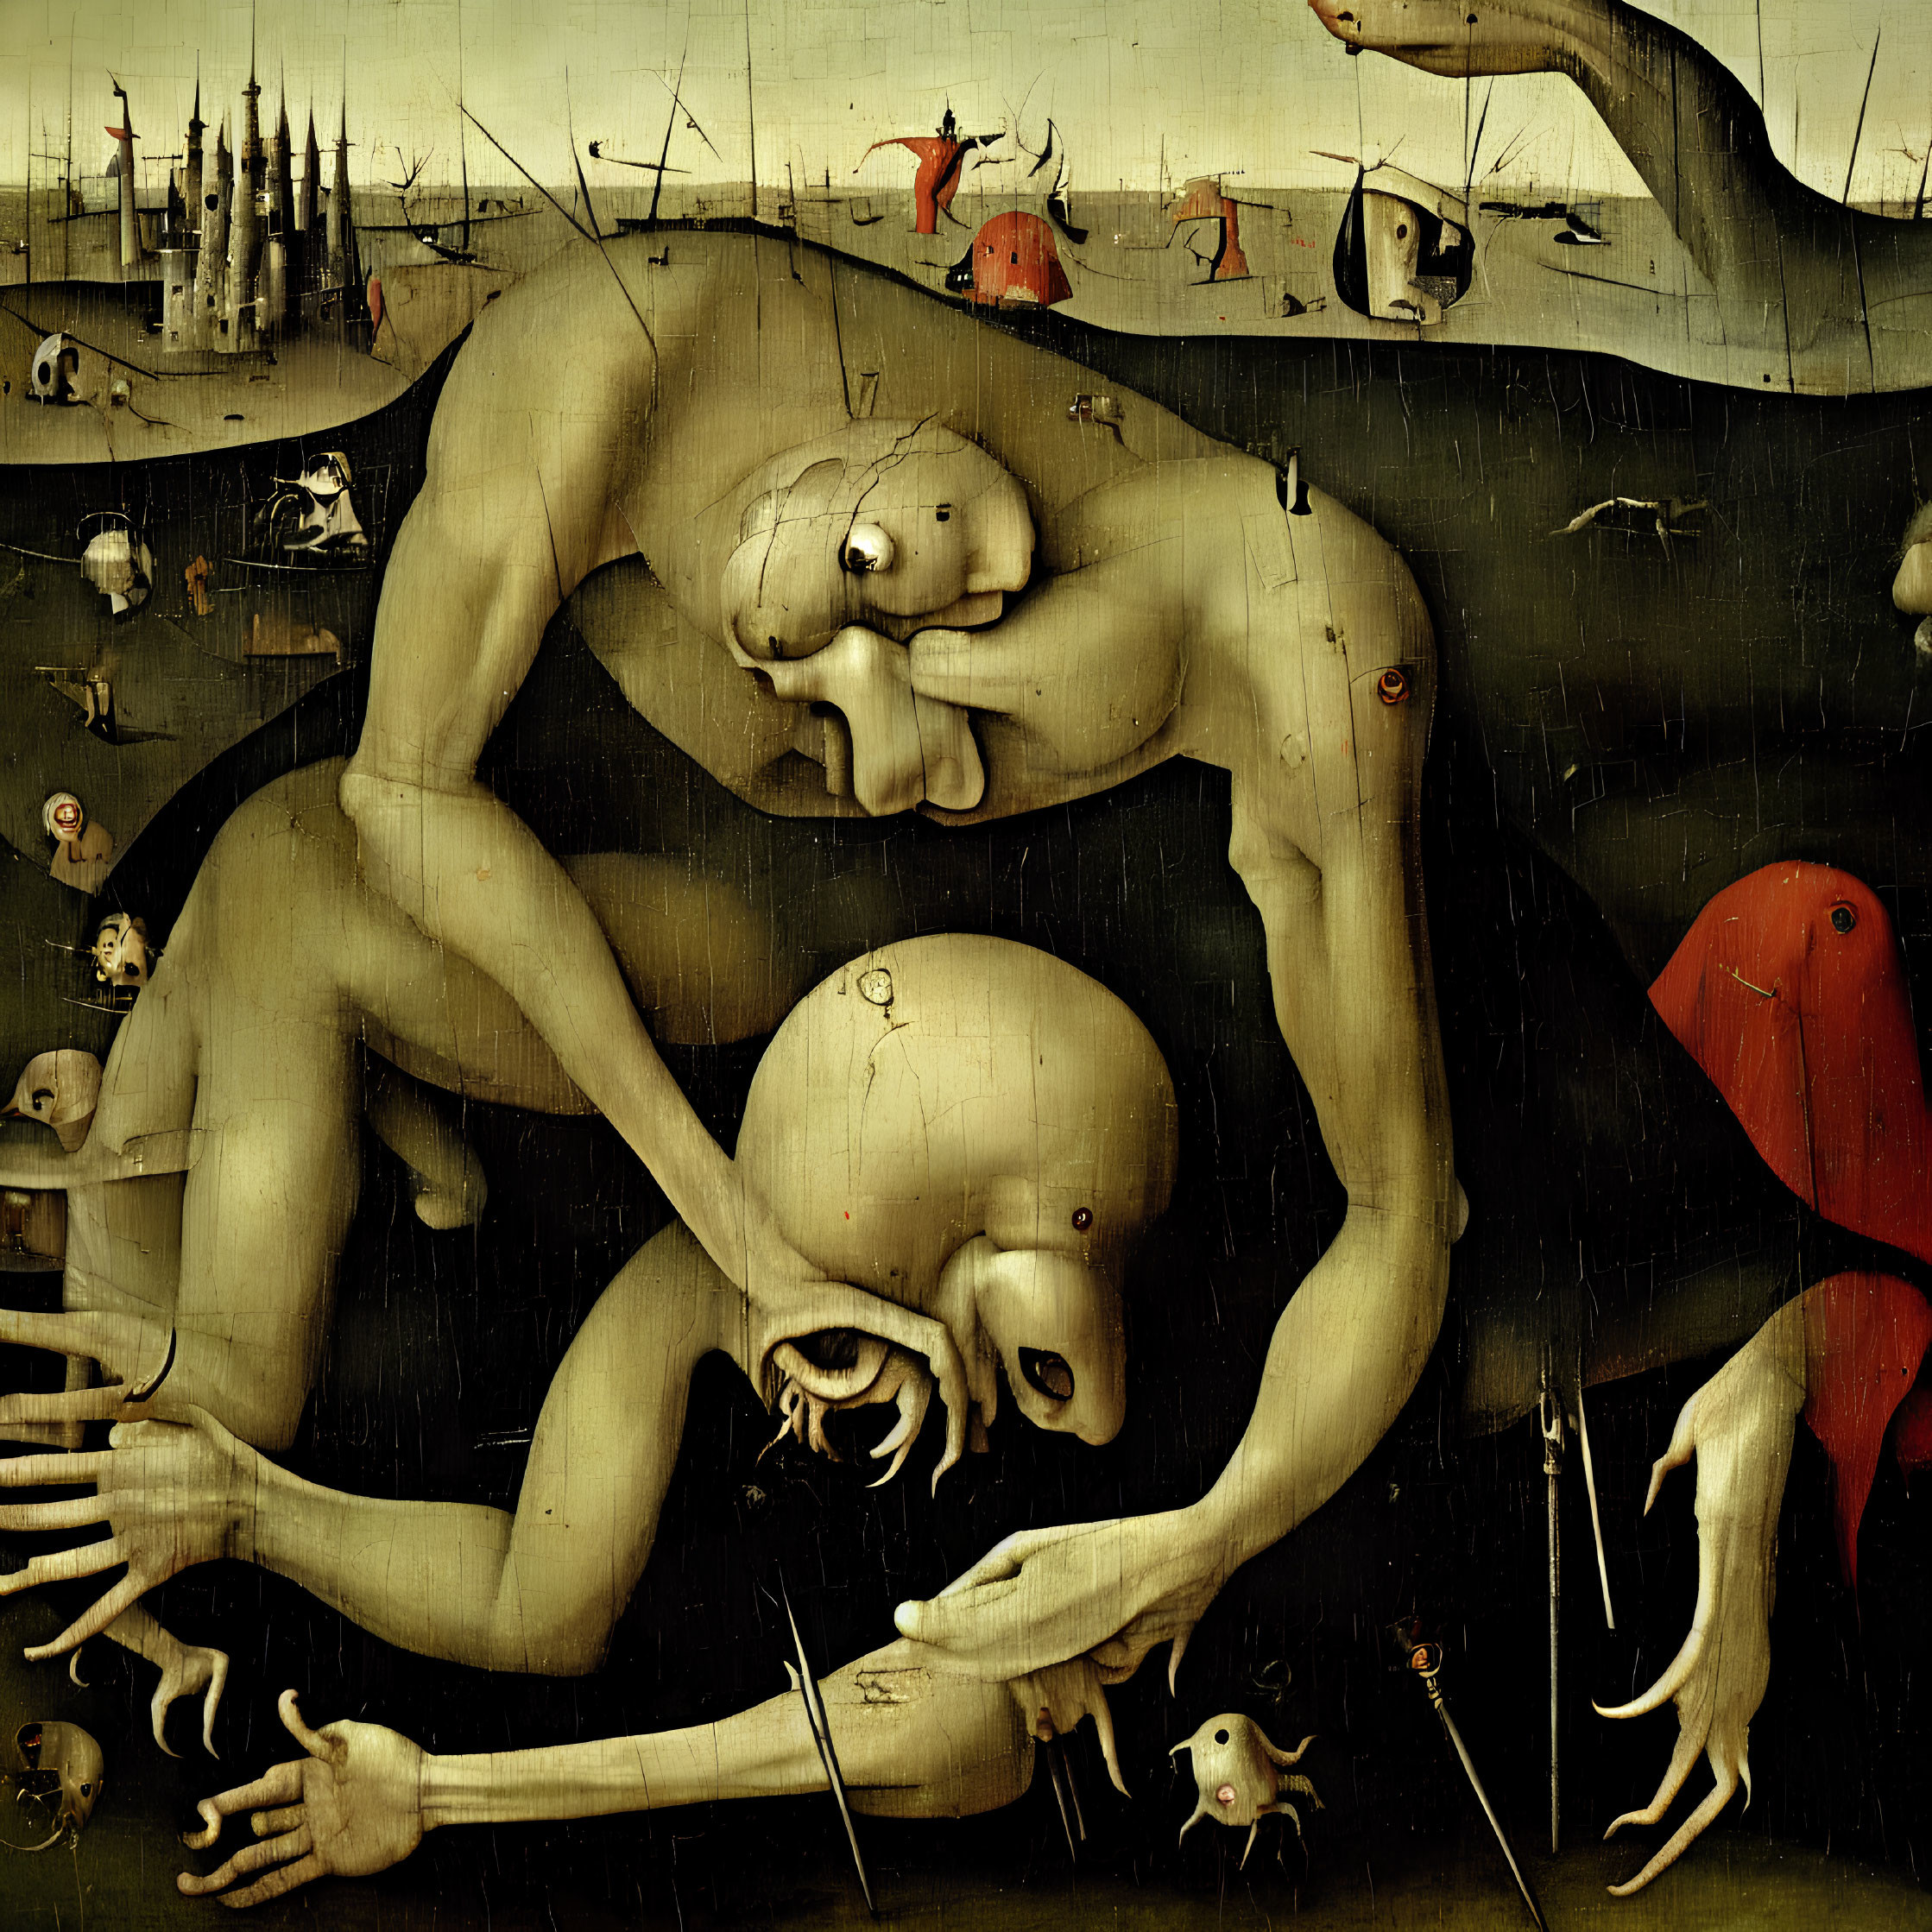 Surrealistic painting with oversized, contorted human figures & bizarre landscape.